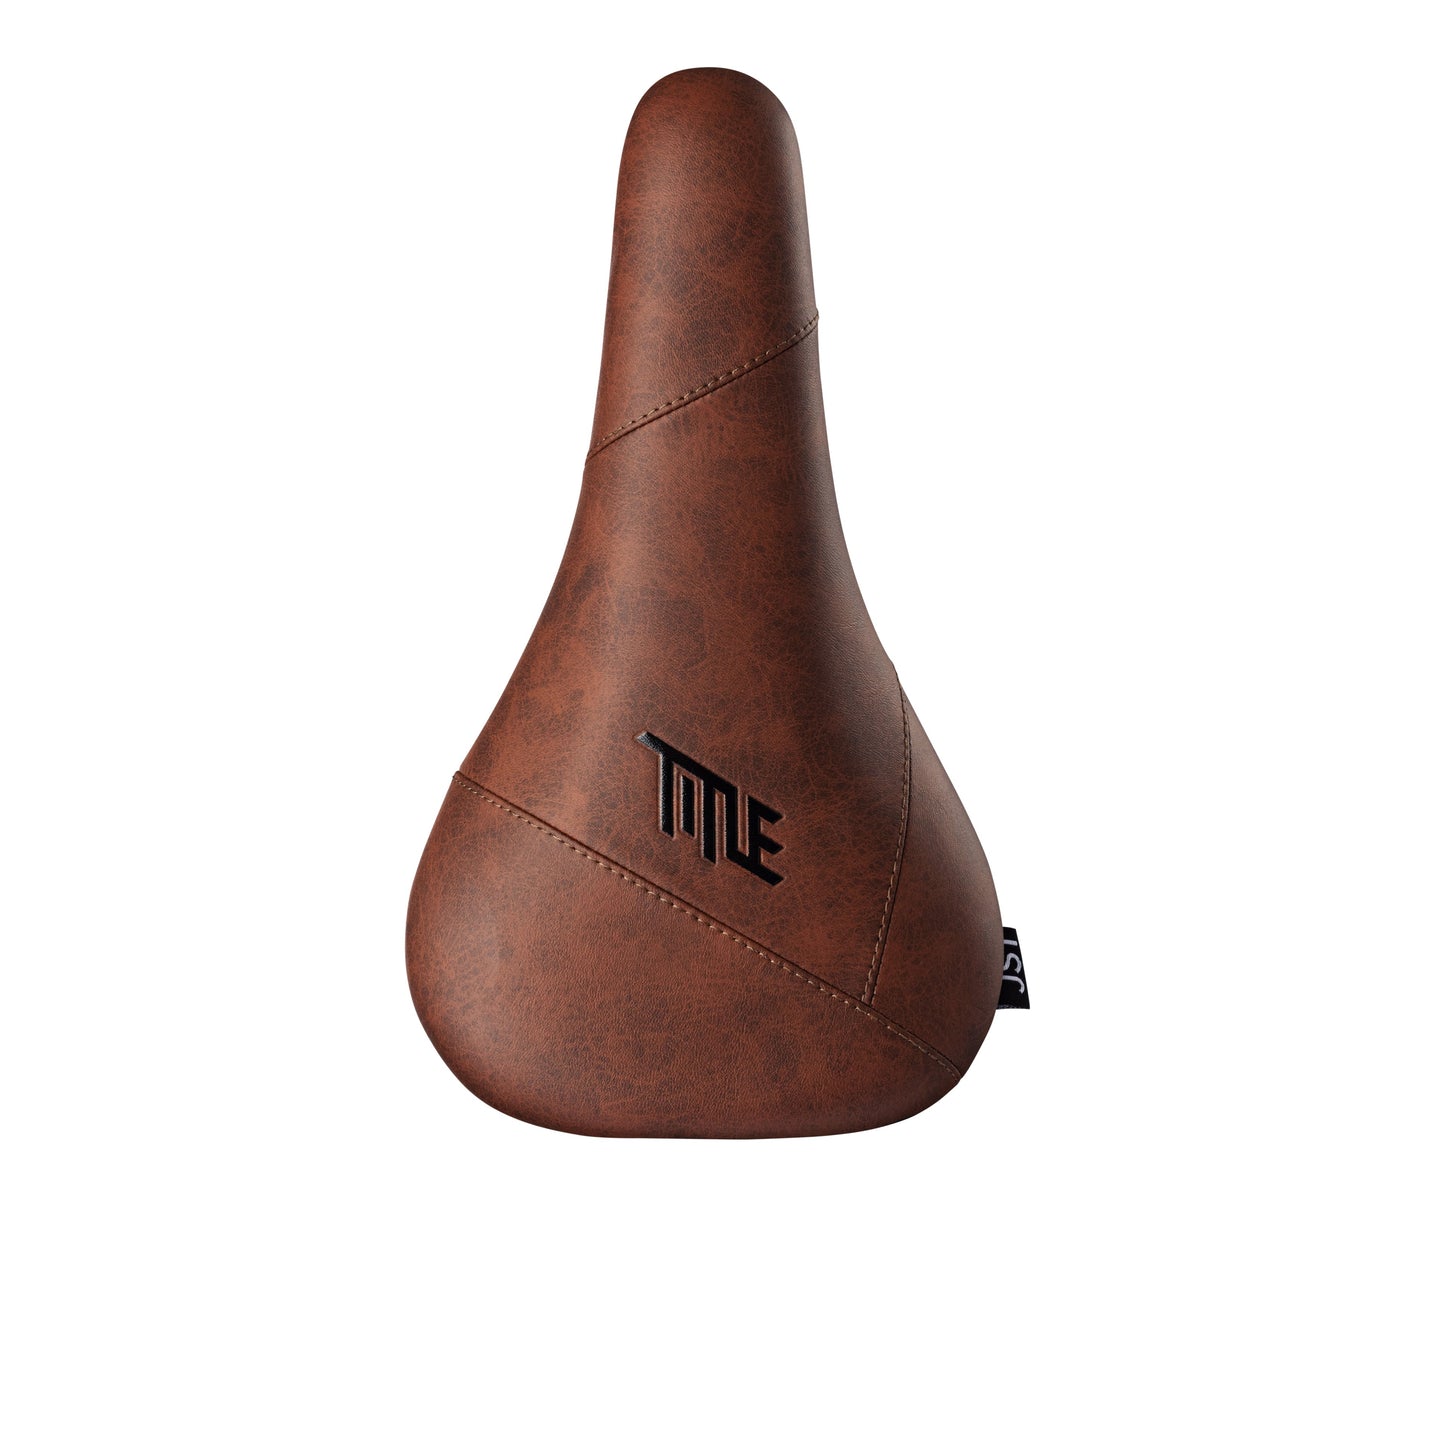 Title JS1 Saddle - Cro-Mo Alloy - 137mm - Brown